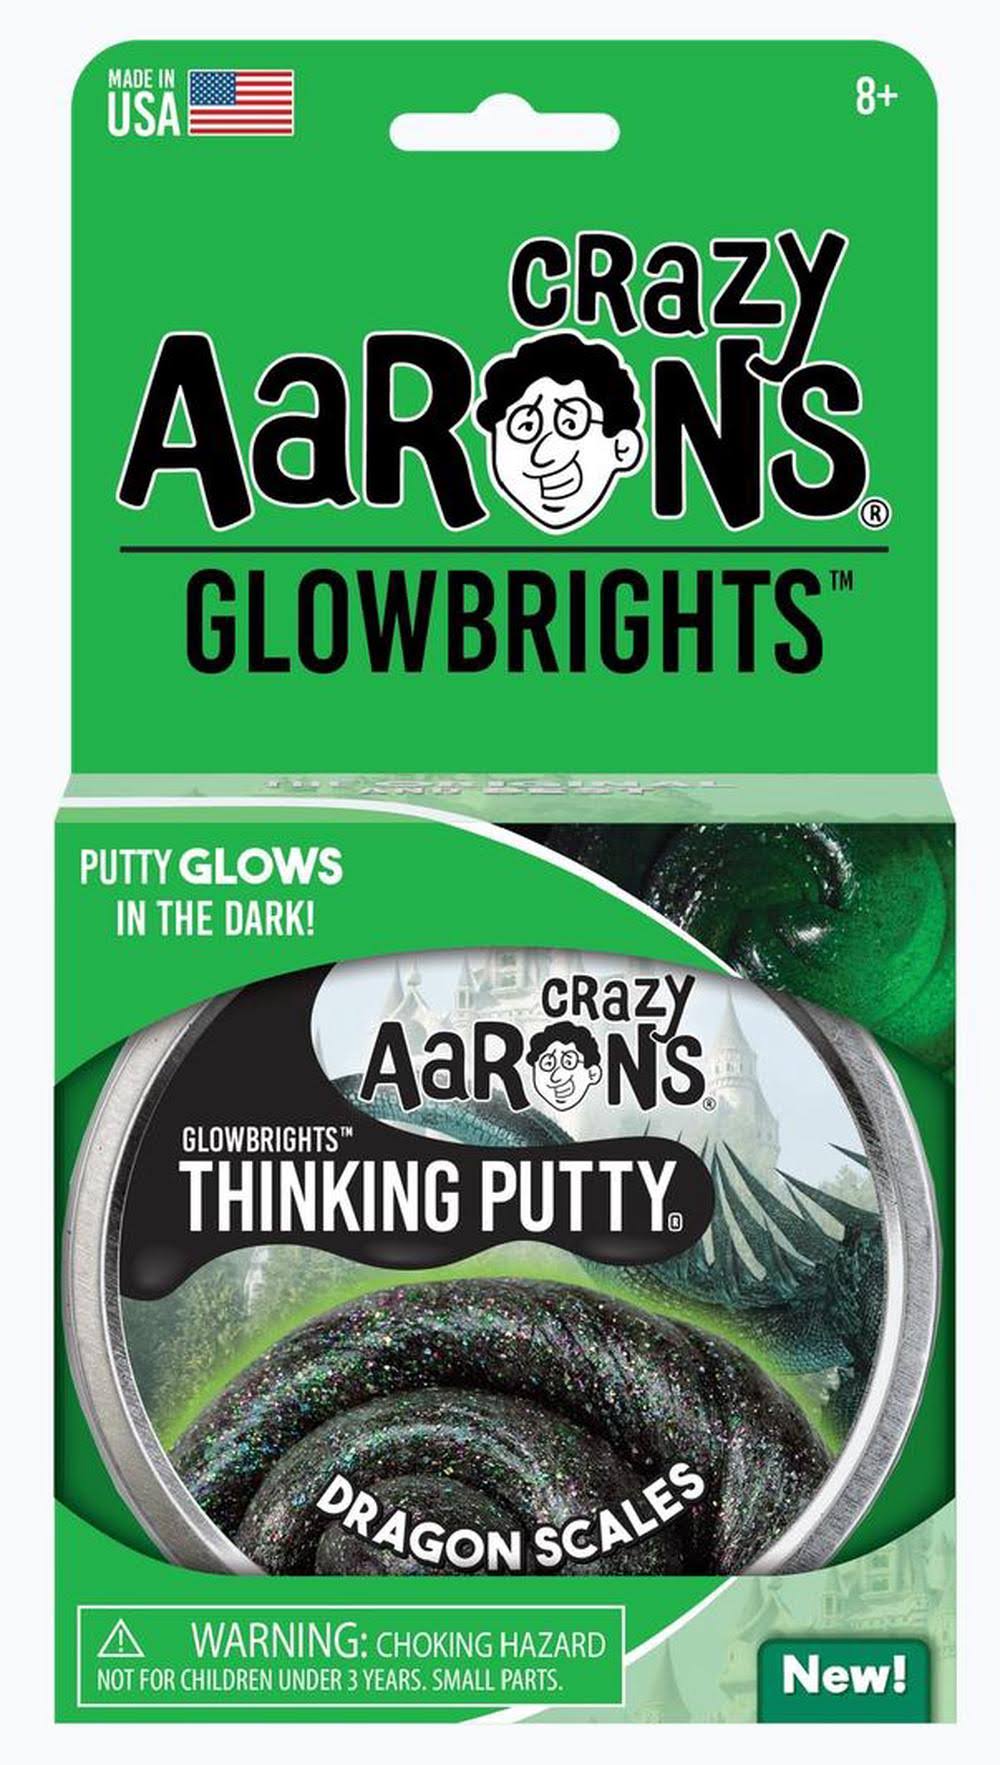 Crazy Aarons: GlowBrights Thinking Putty - Dragons Scale